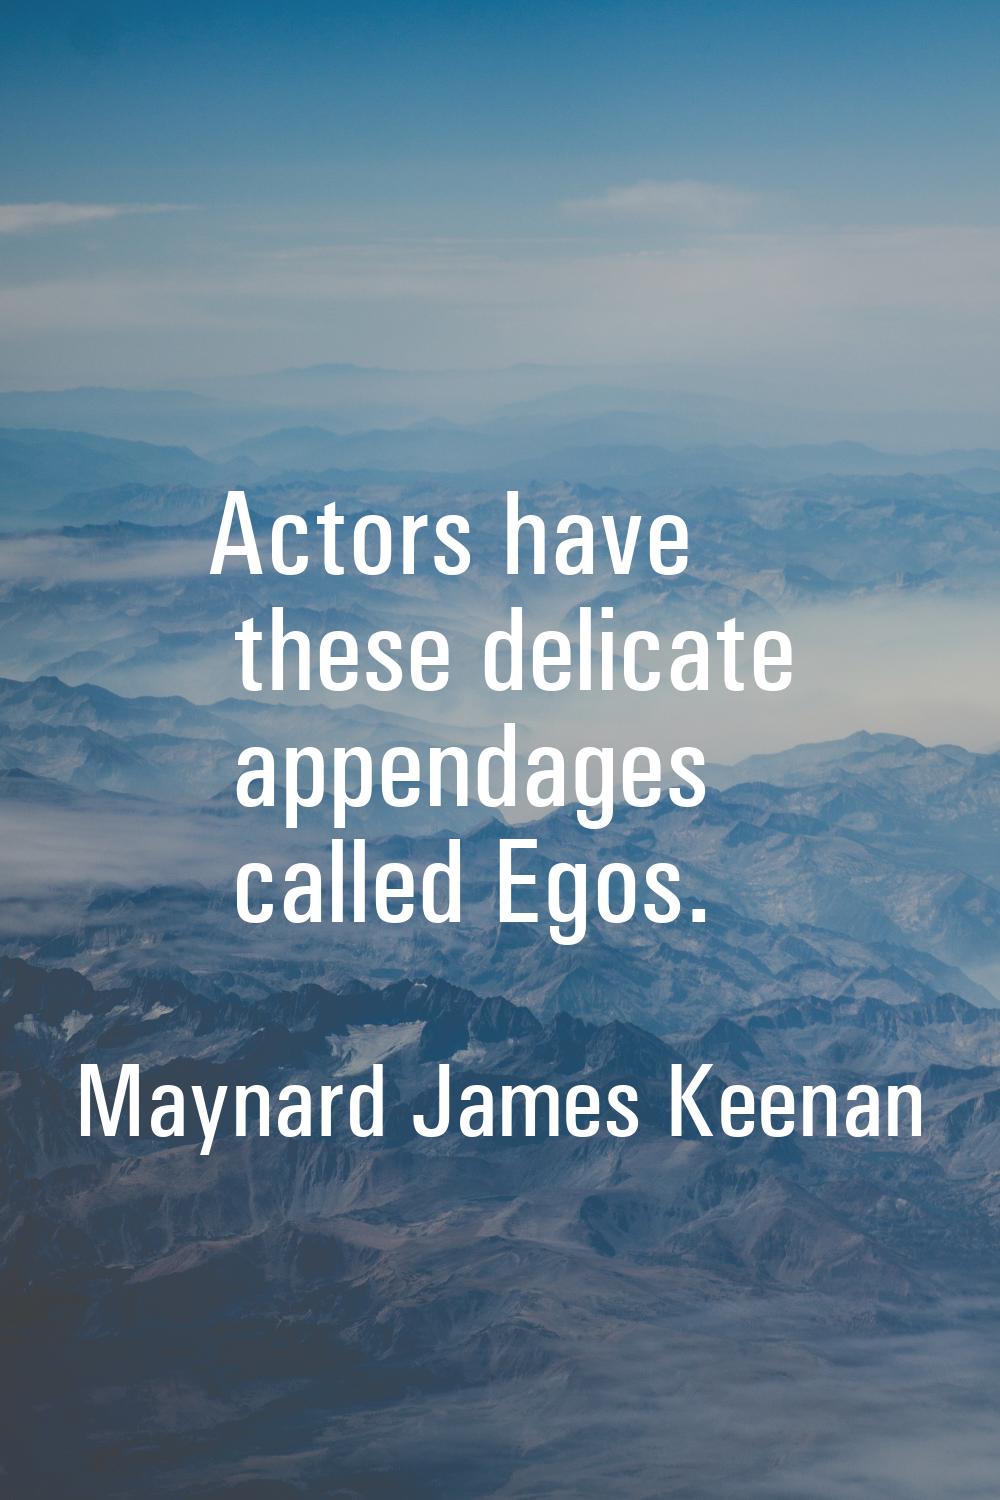 Actors have these delicate appendages called Egos.